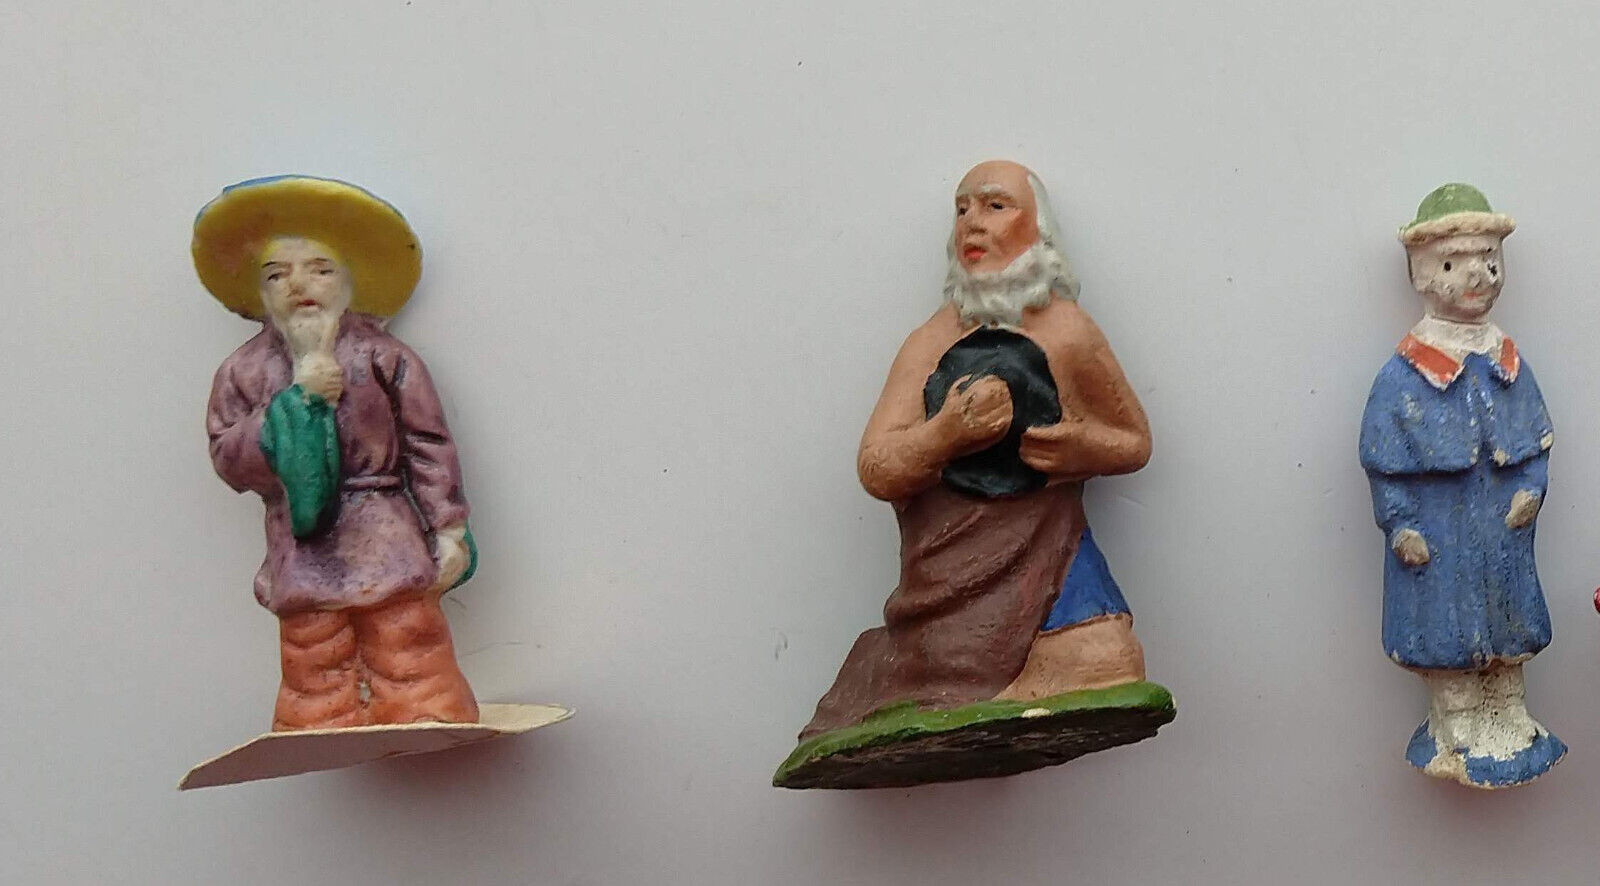 Lot of 3 Miniature Vintage Bisque Other Figurines 2.5 to 2 3/4 Inch One German